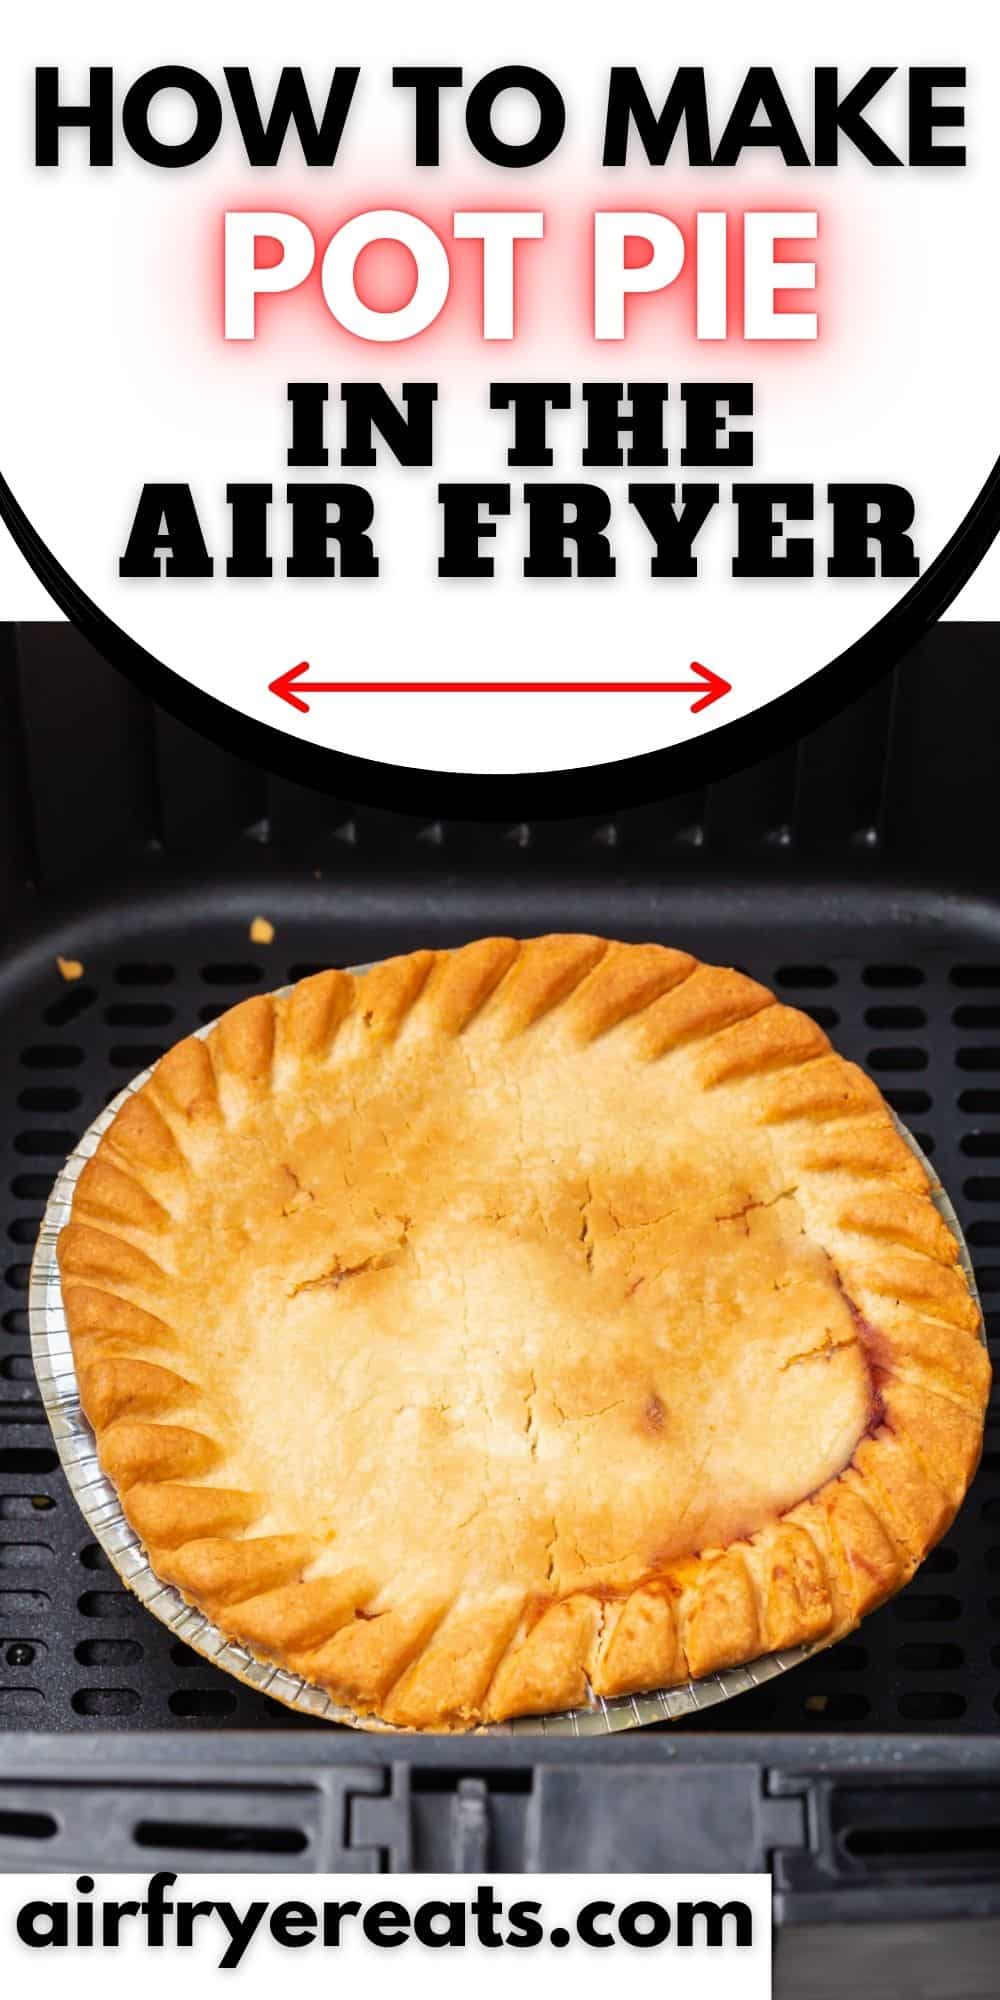 Make a hot, flaky, delicious frozen pot pie in air fryer in half the time that it takes in the oven! A tasty pot pie is the perfect convenient comfort food, and the air fryer makes cooking it quick and easy. via @vegetarianmamma